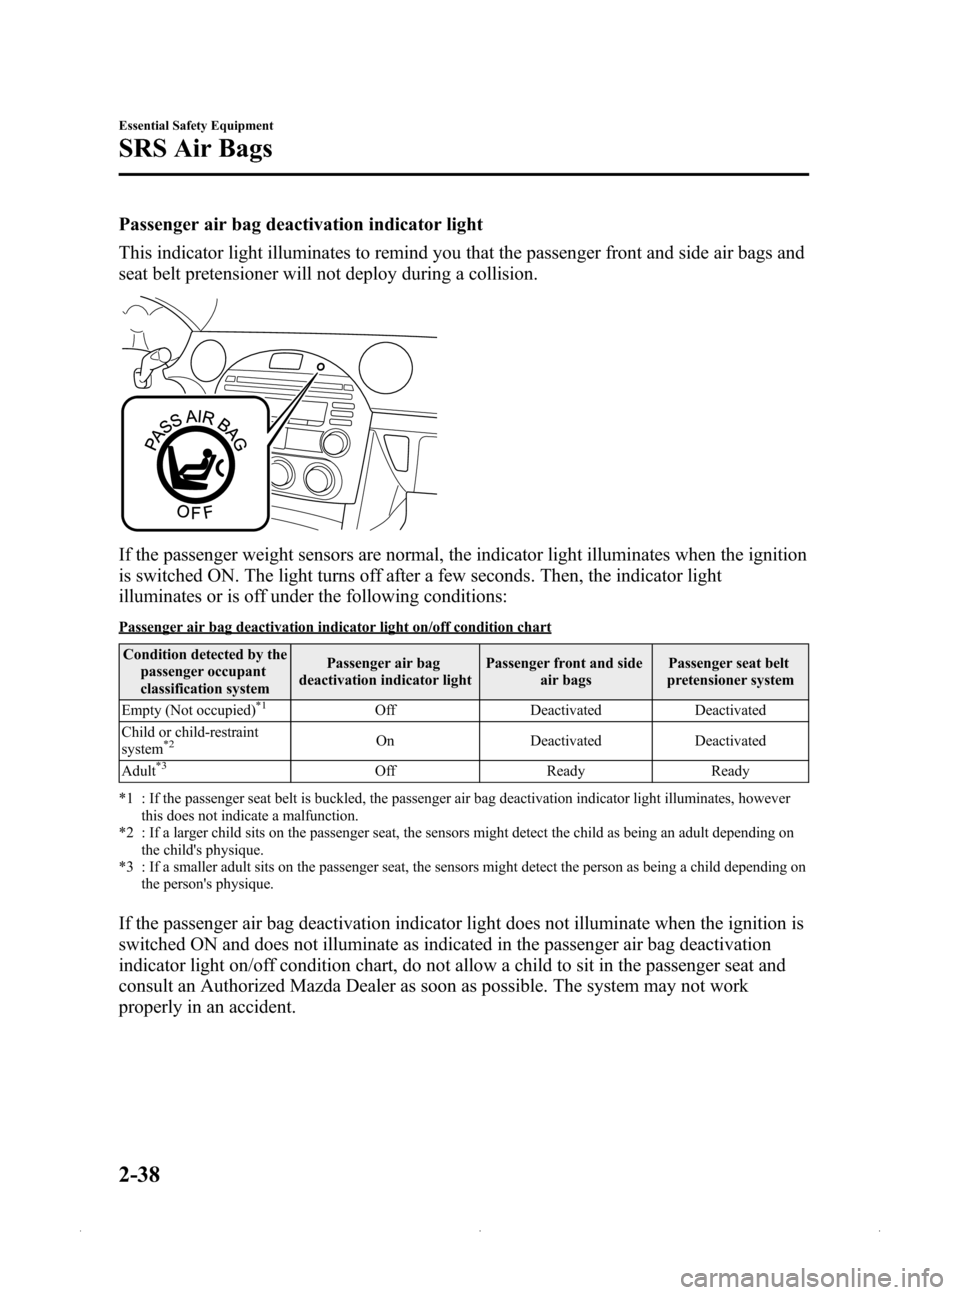 MAZDA MODEL MX-5 PRHT 2015  Owners Manual (in English) Black plate (50,1)
Passenger air bag deactivation indicator light
This indicator light illuminates to remind you that the passenger front and side air bags and
seat belt pretensioner will not deploy d